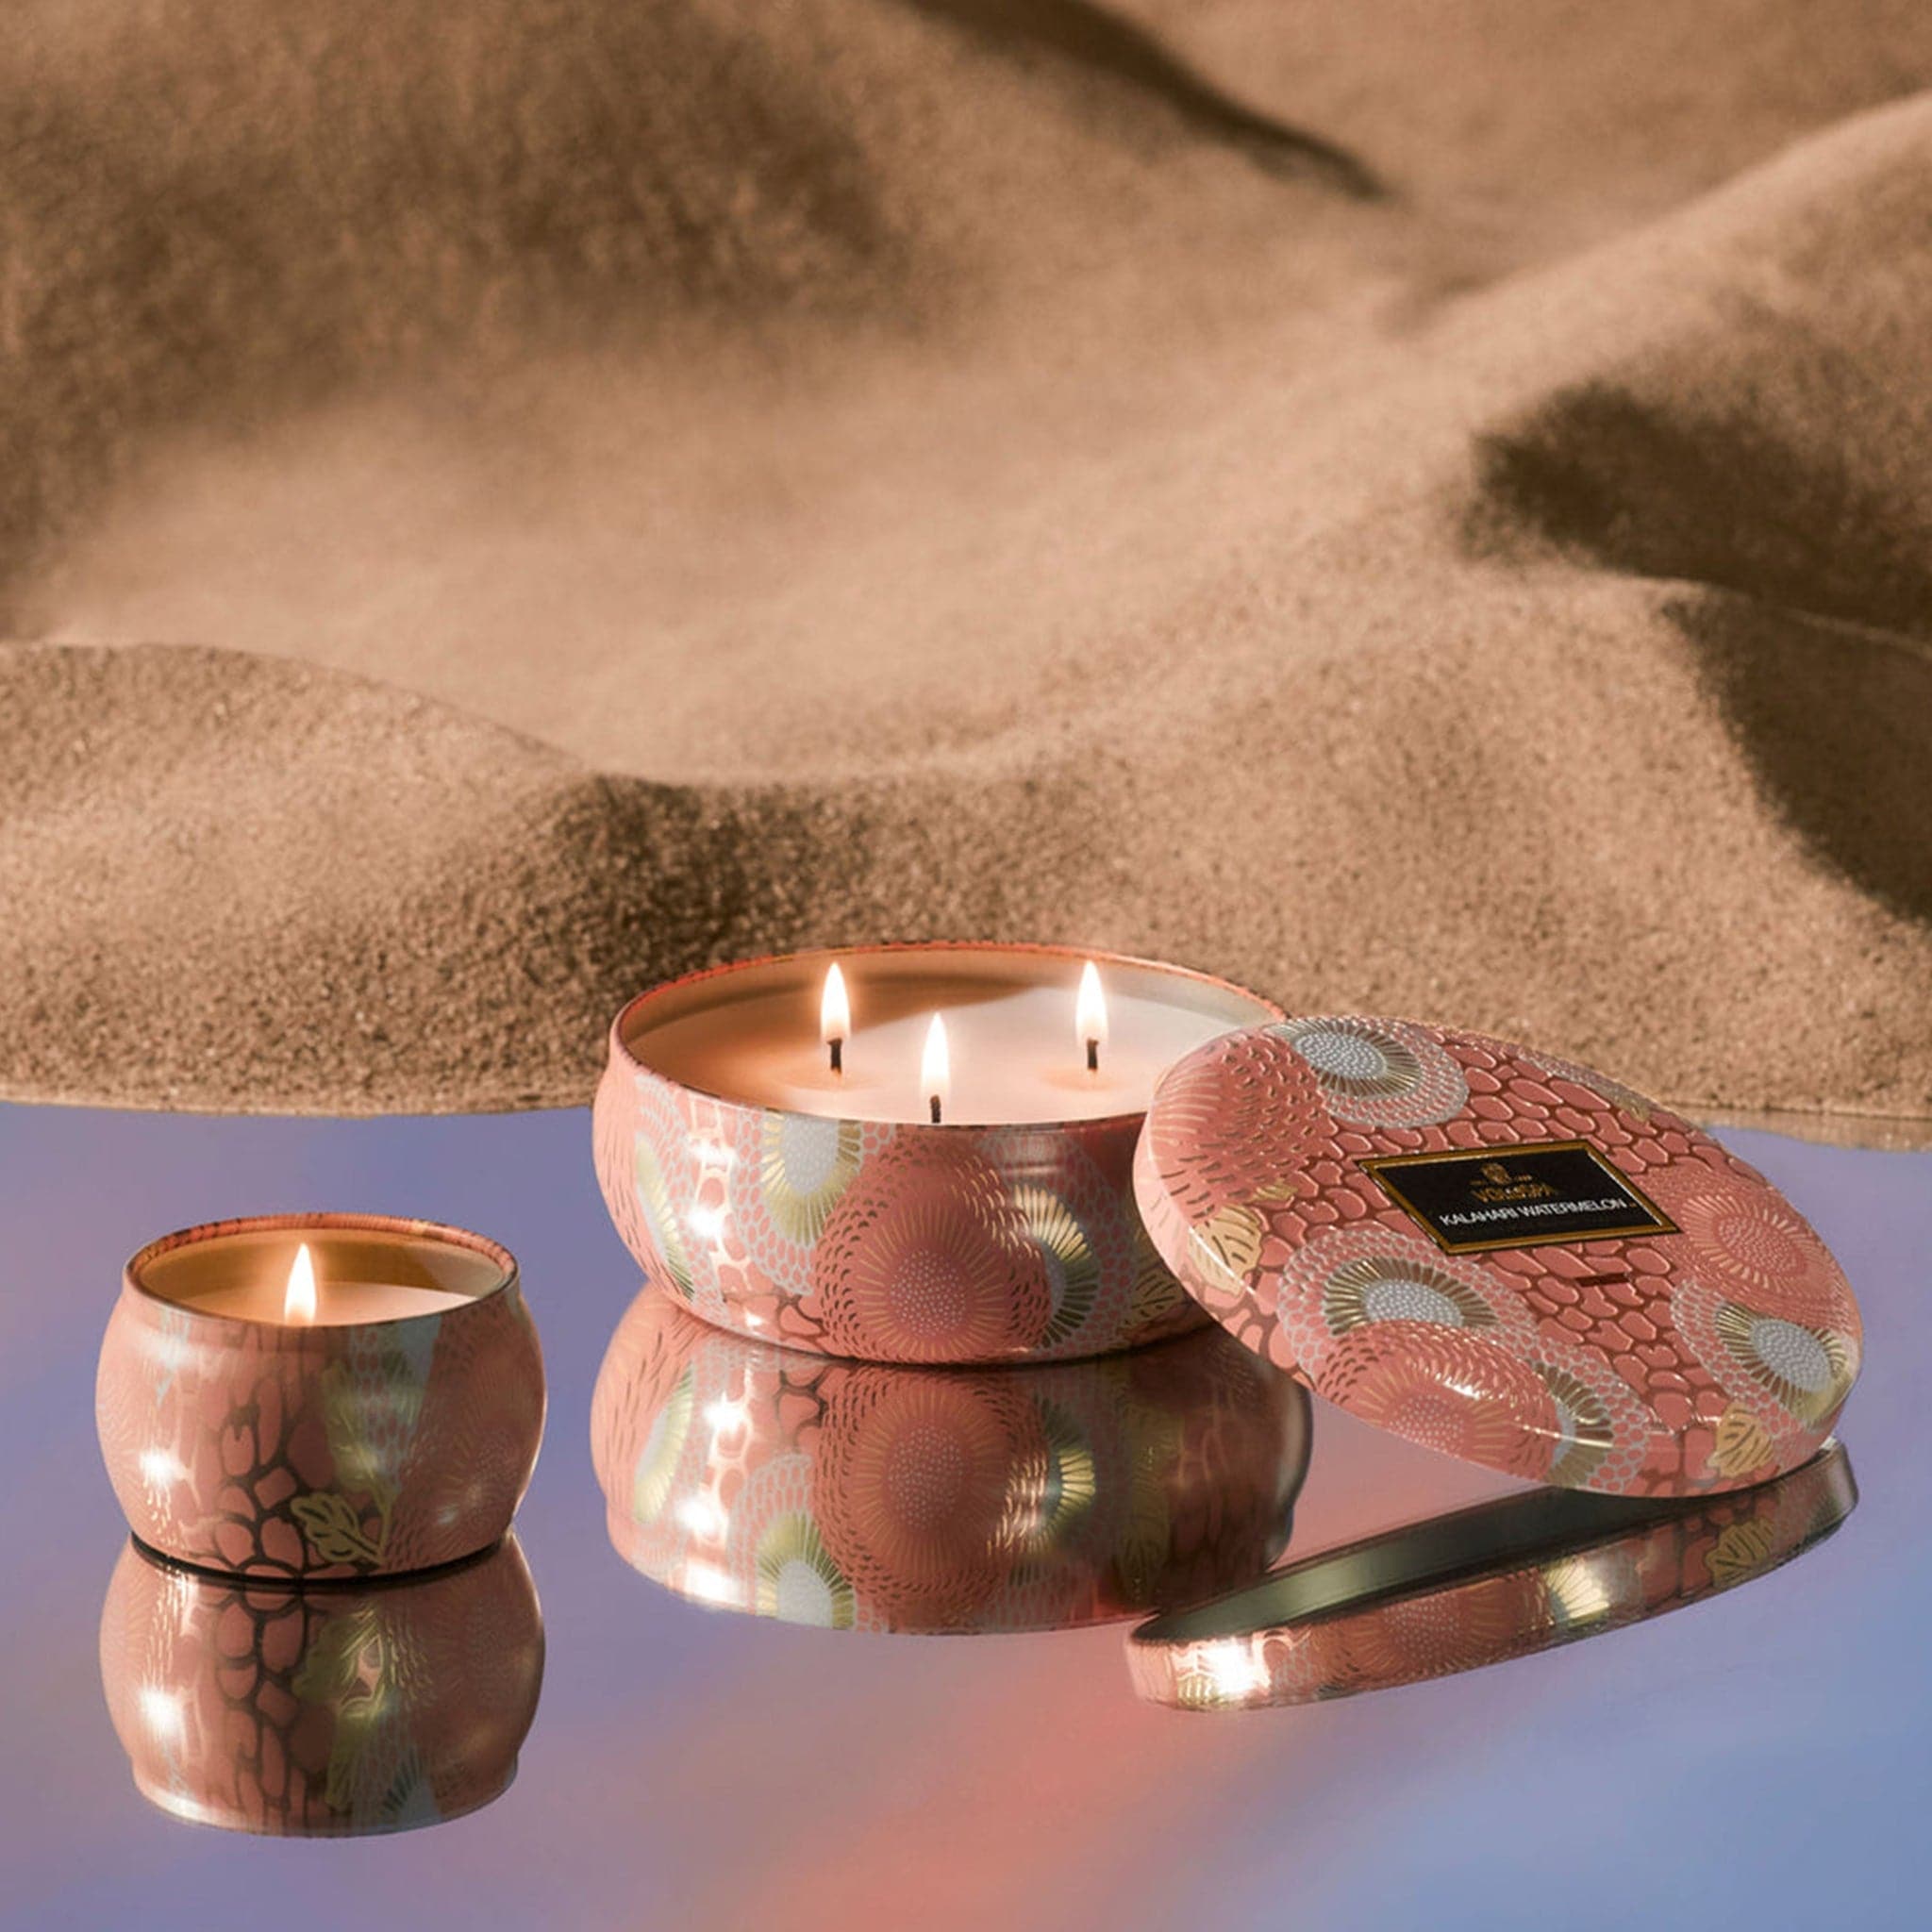 The Kalahari collection shown together with the mini tin and 3-wick tin. Its colors are beautiful and the jar's tin distributes light in a romantic way.